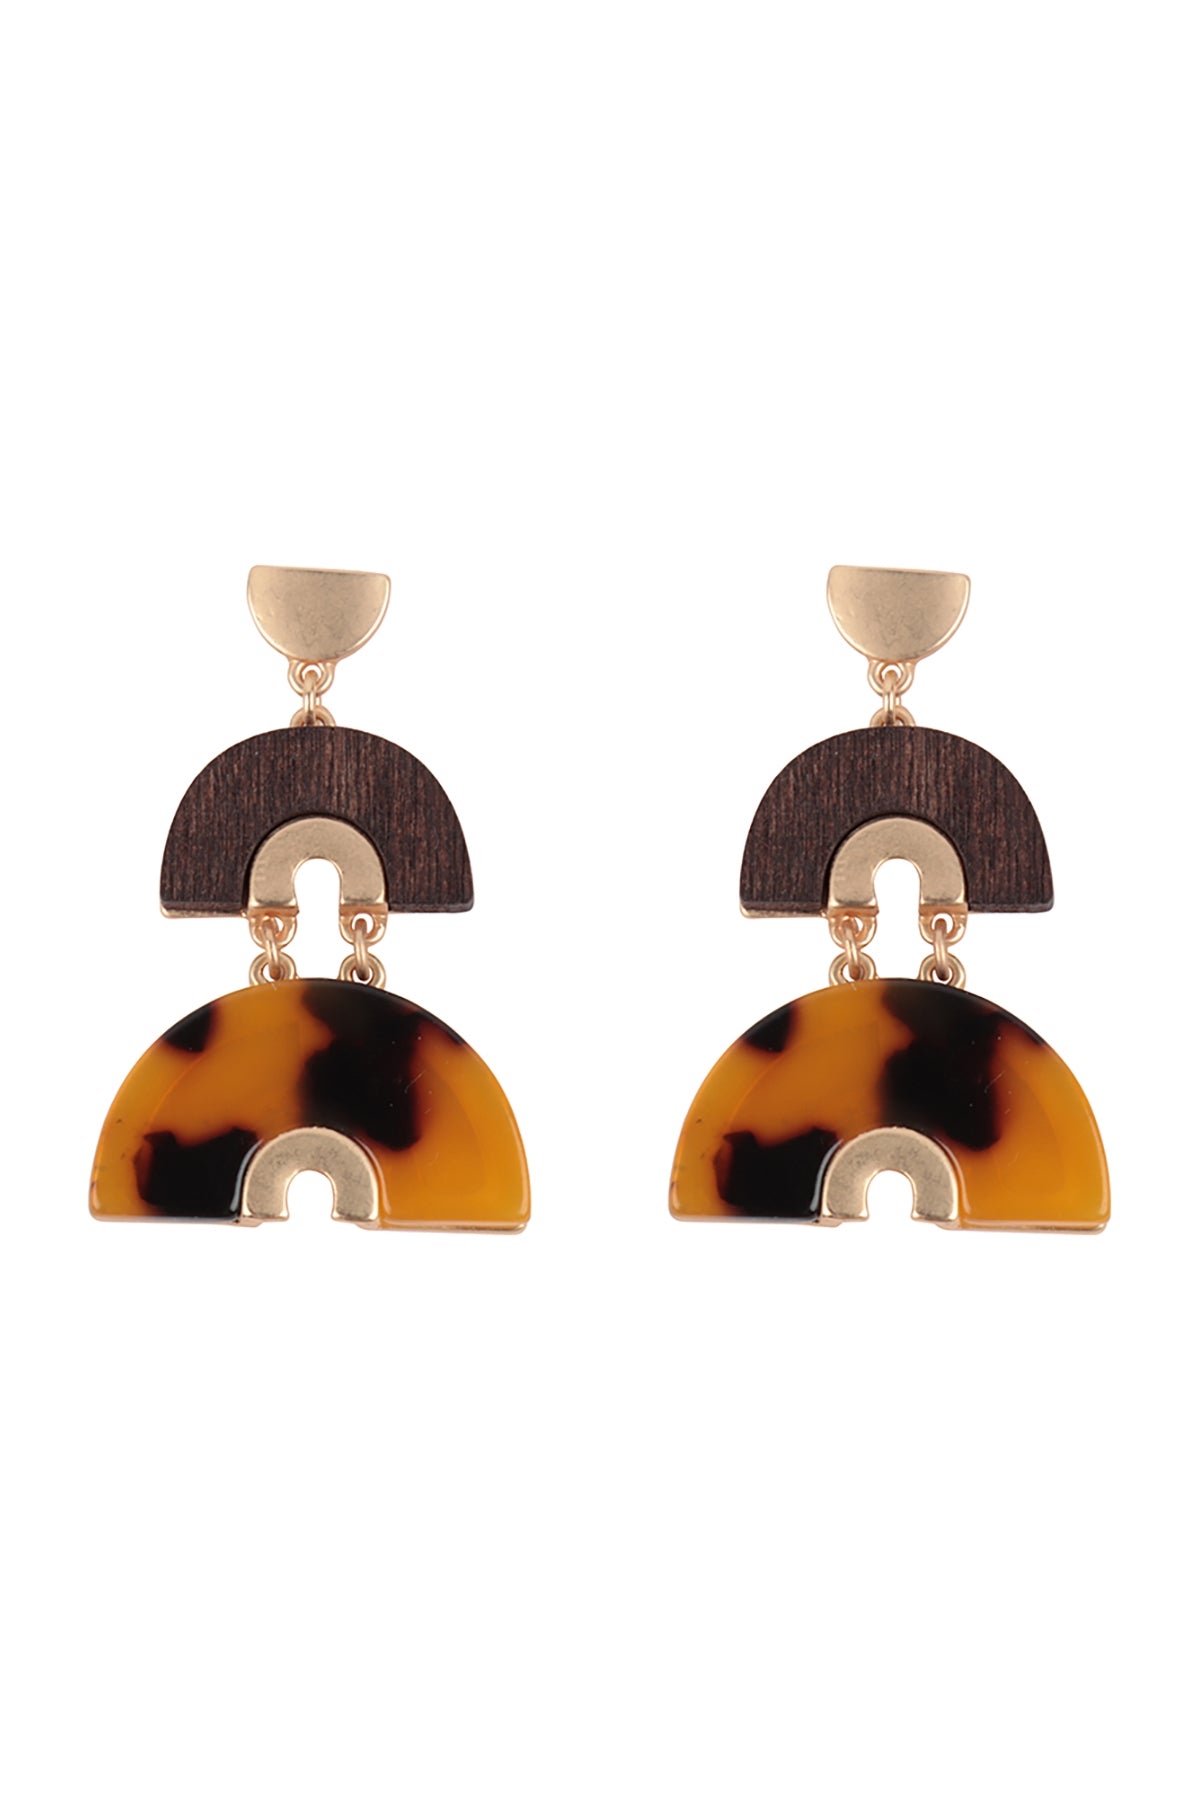 ACETATE WOOD ARCH LAYERED DROP EARRINGS (NOW $3.00 ONLY!)